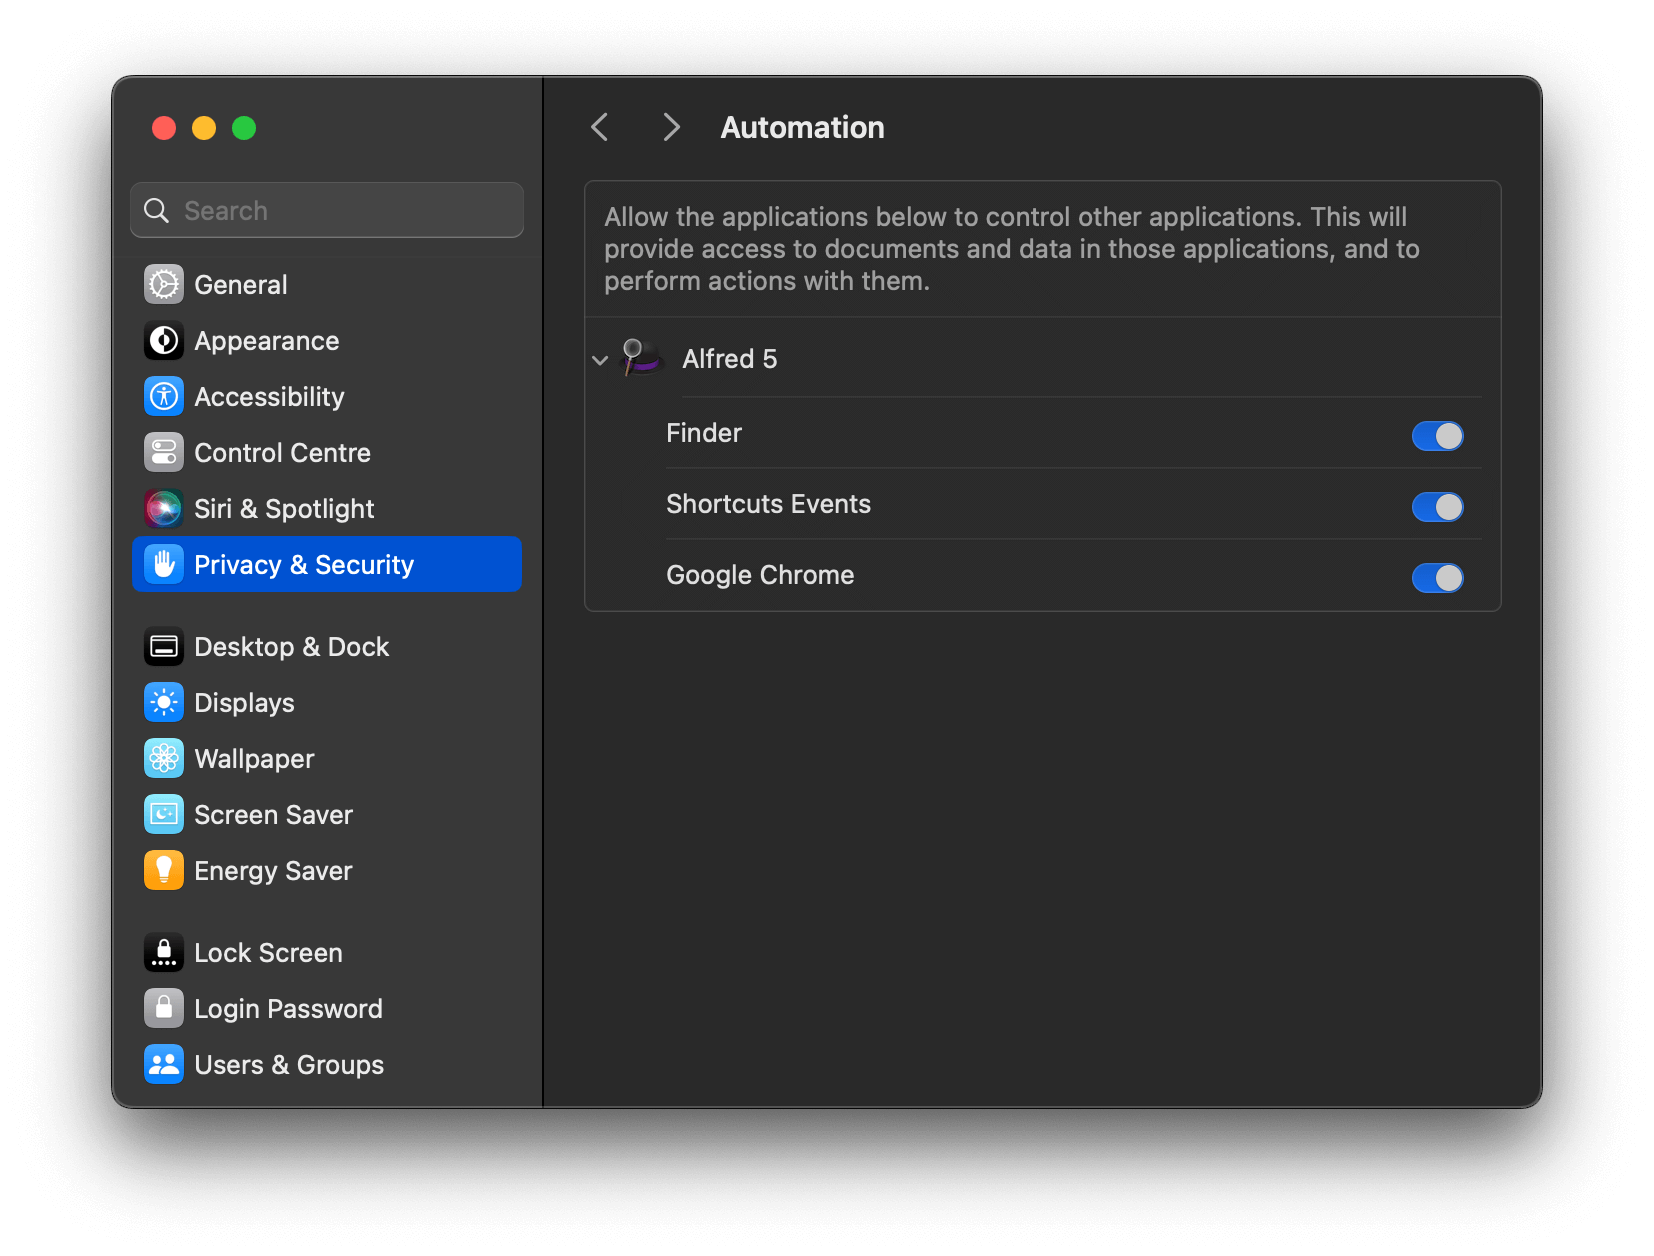 Granting Automation Access in macOS Mojave Security and Privacy Preferences